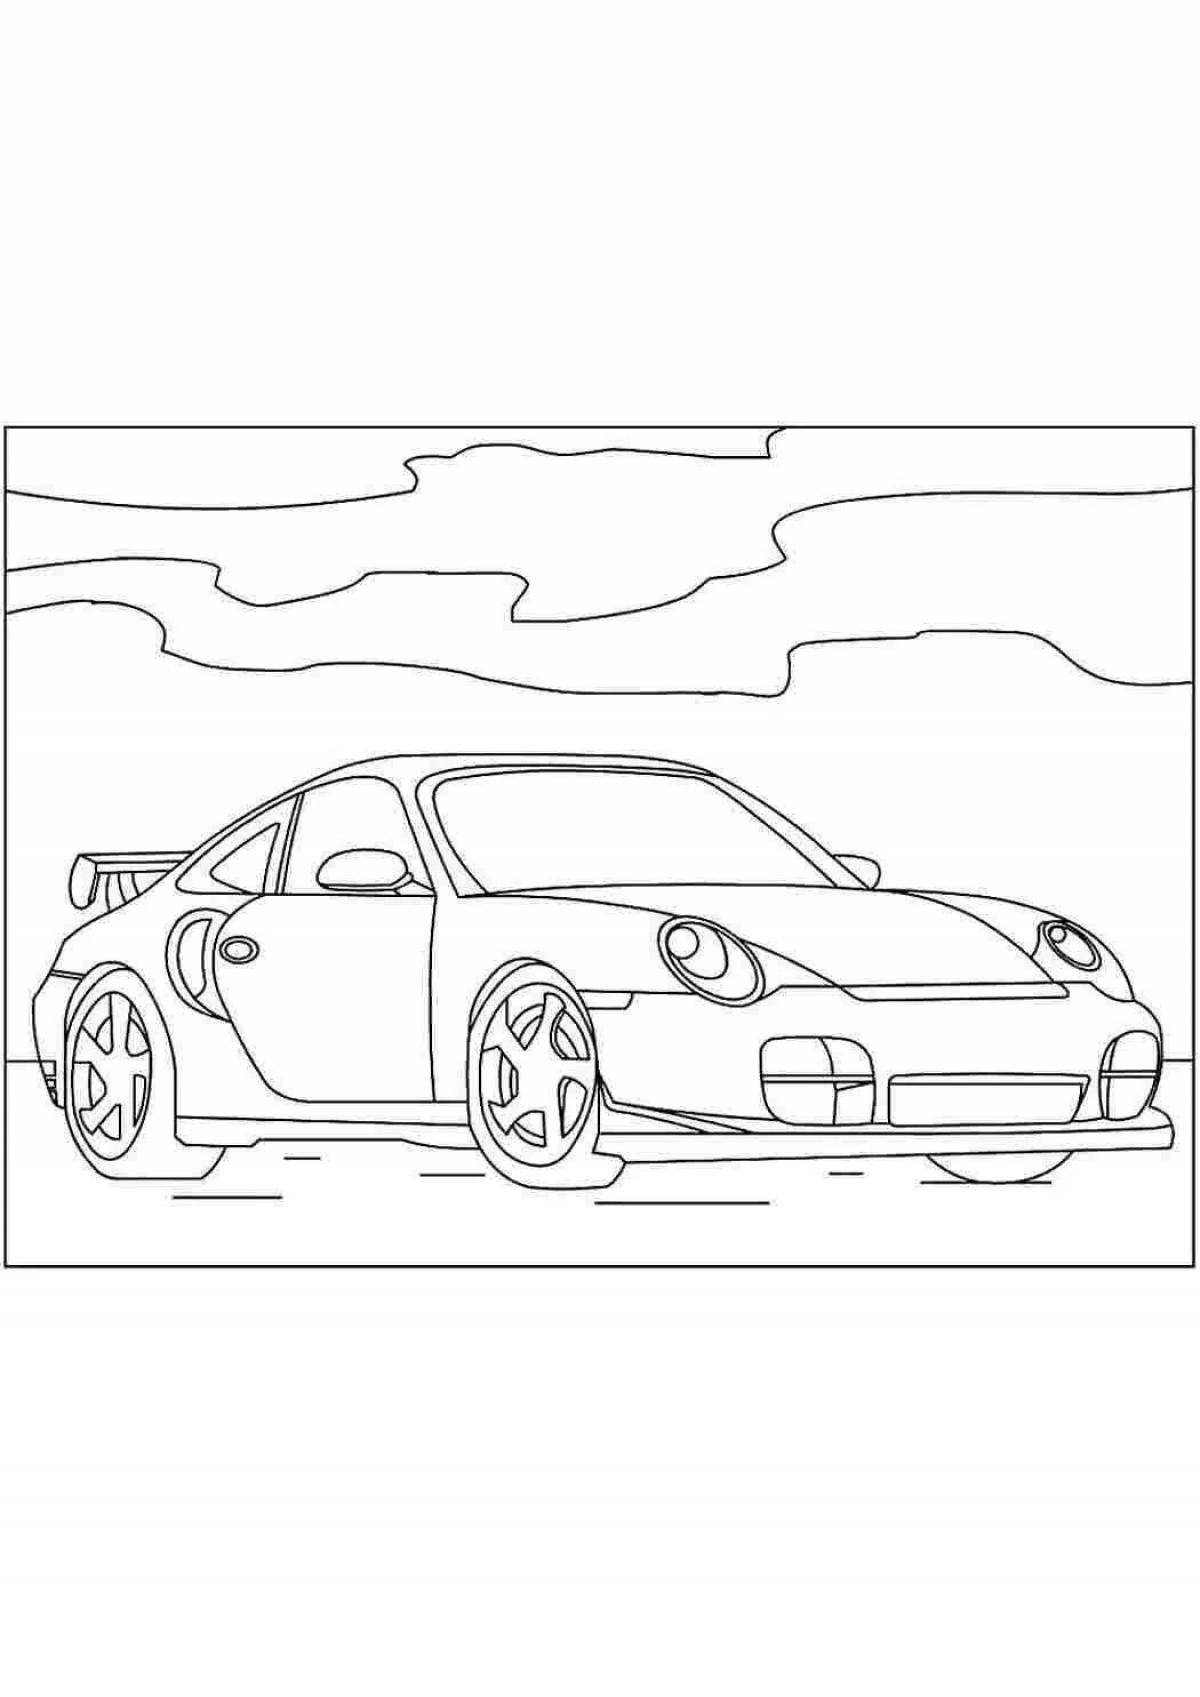 Dazzling porsche coloring pages for kids